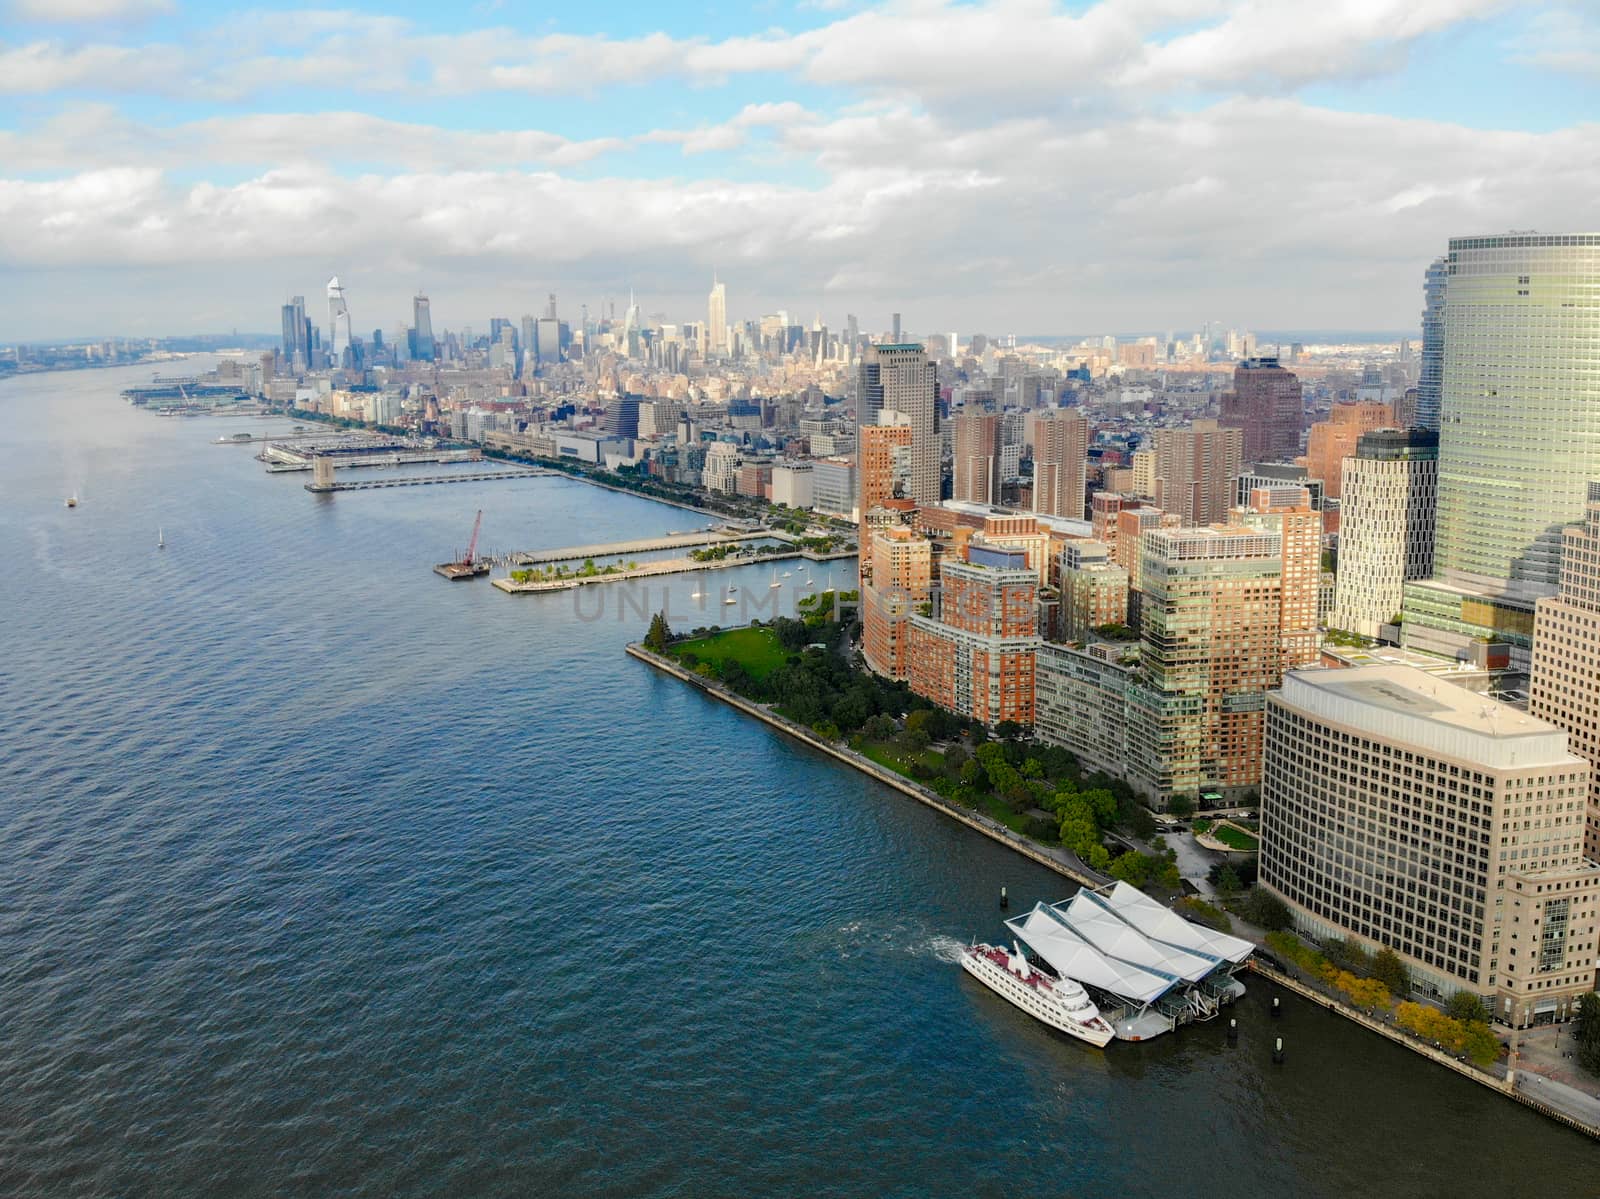 Aerial view of Manhattan skyline with Battery Park, New York, USA. Skyline with skyscrapers and financial district and Hudson river, New York, USA. February 13th, 2020 